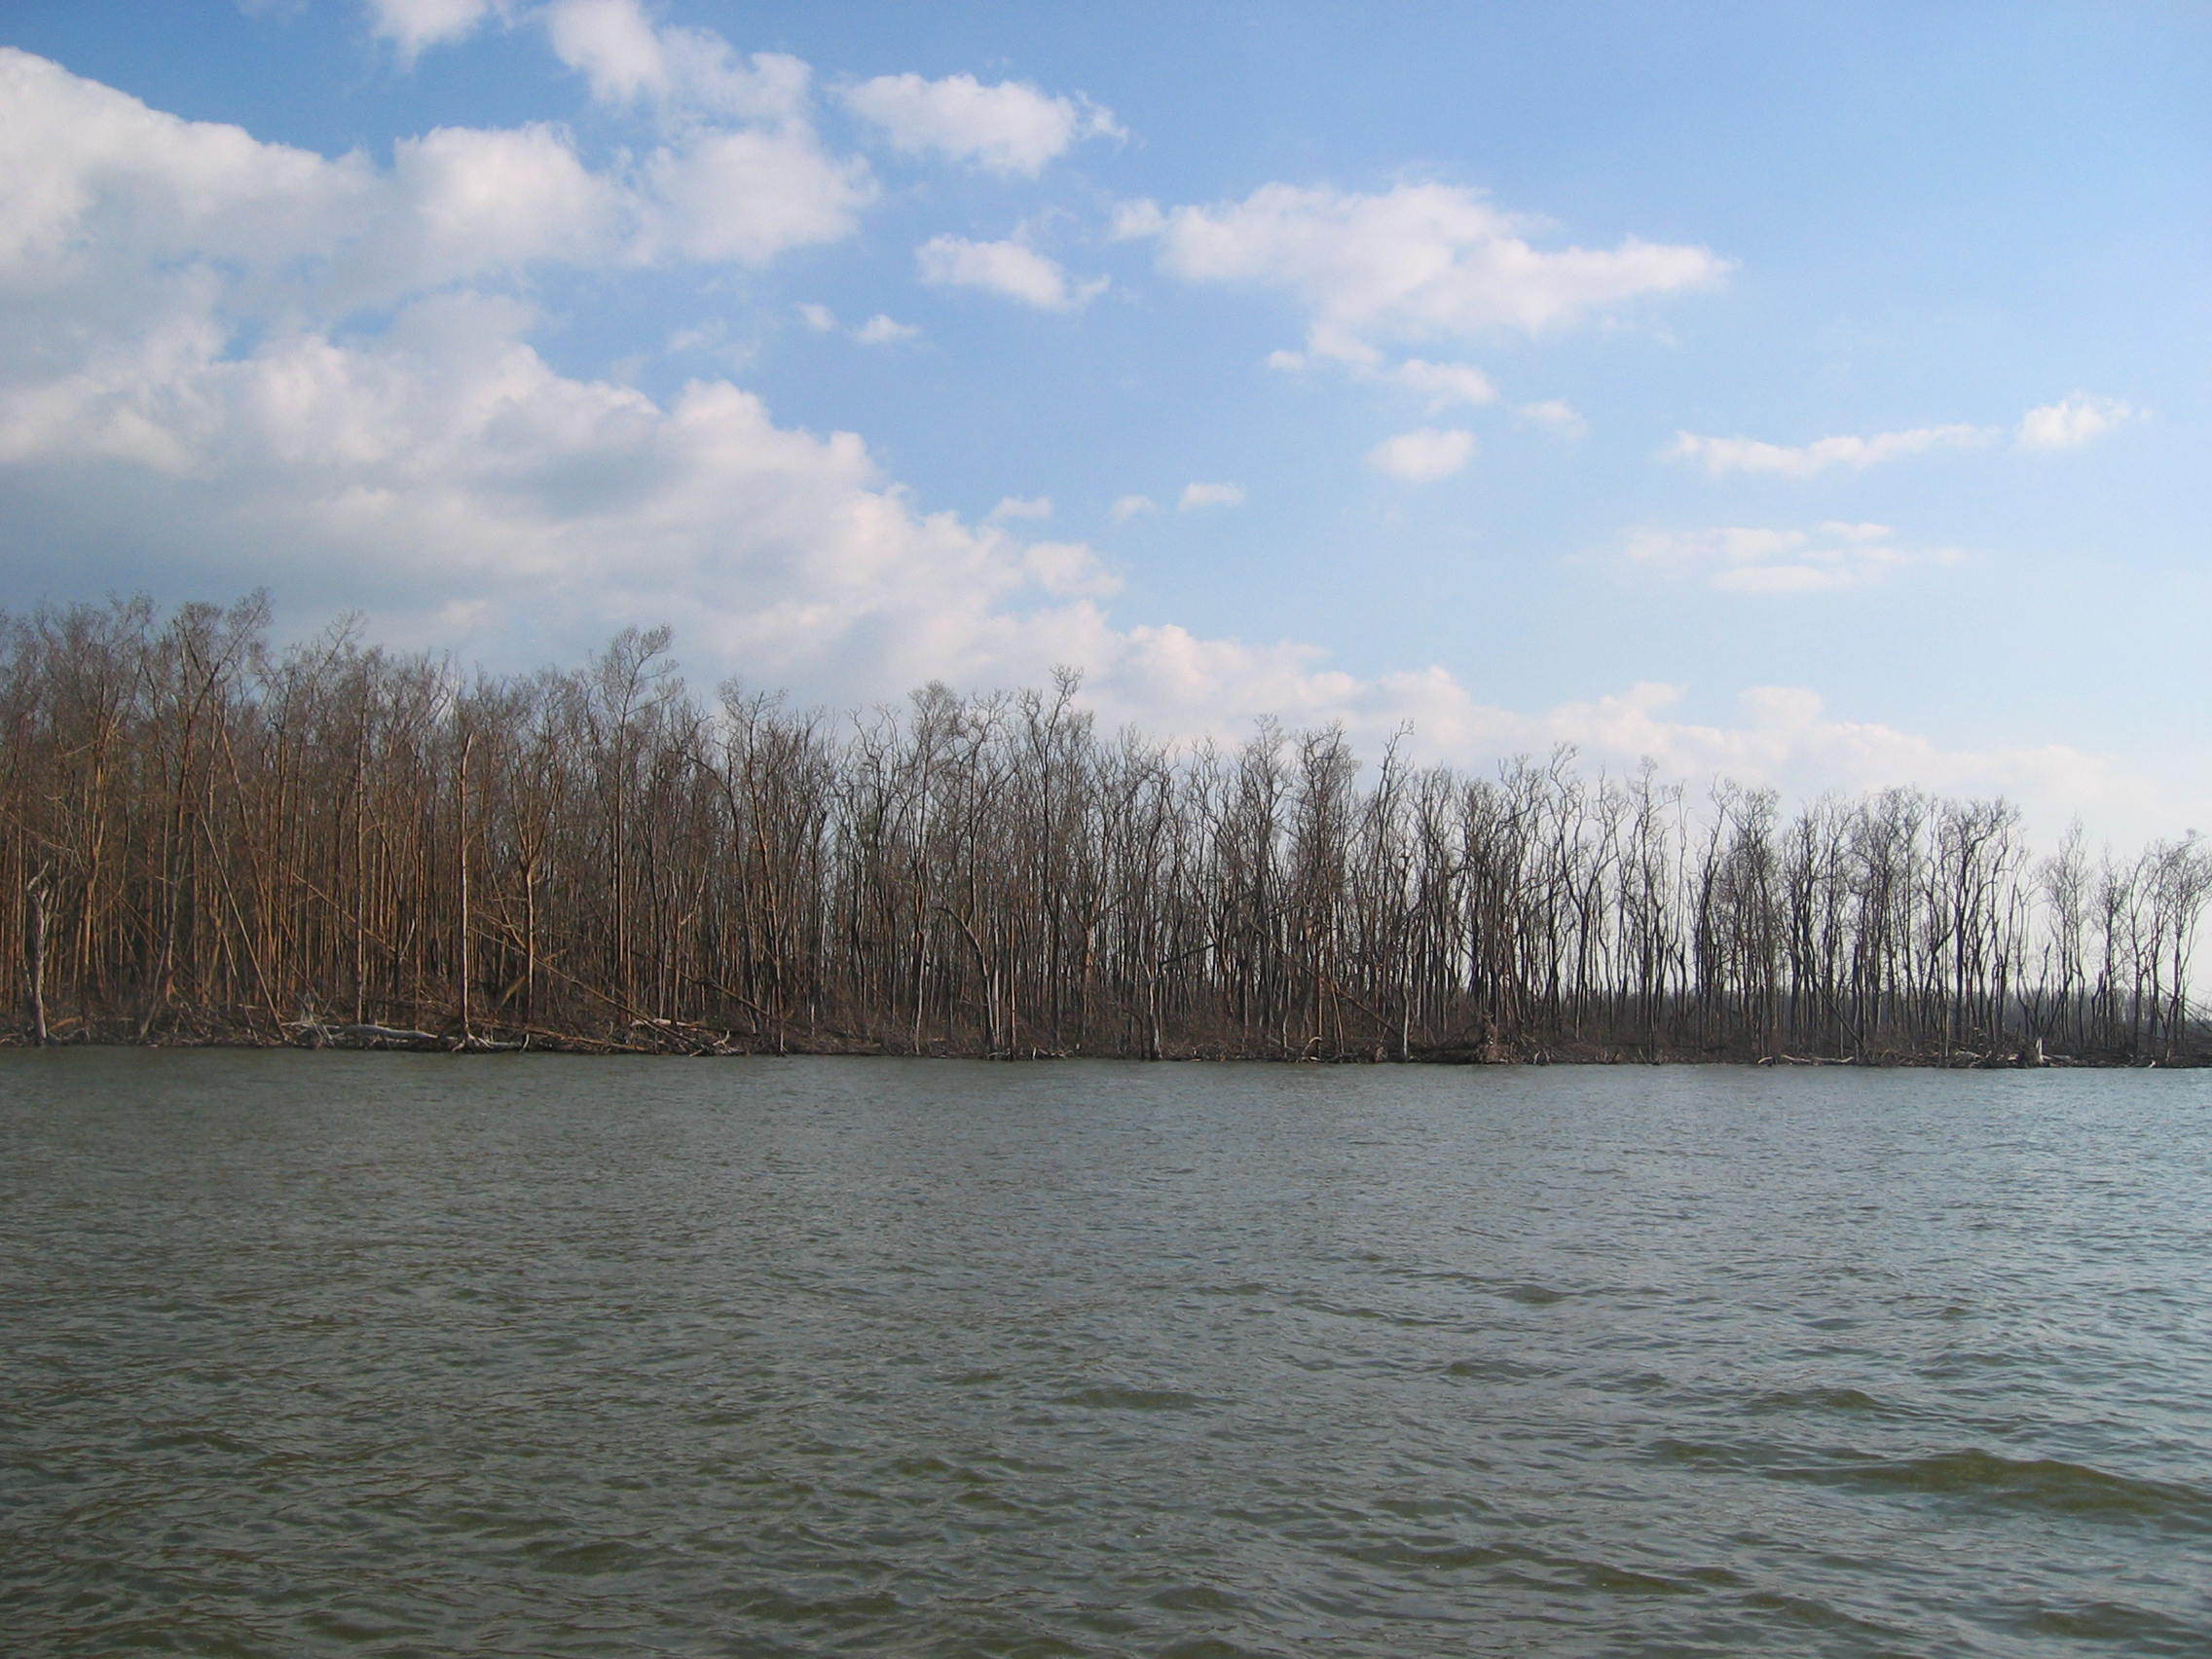 Mangrove forest at the mouth of Shark River damaged by Hurricane Wilma